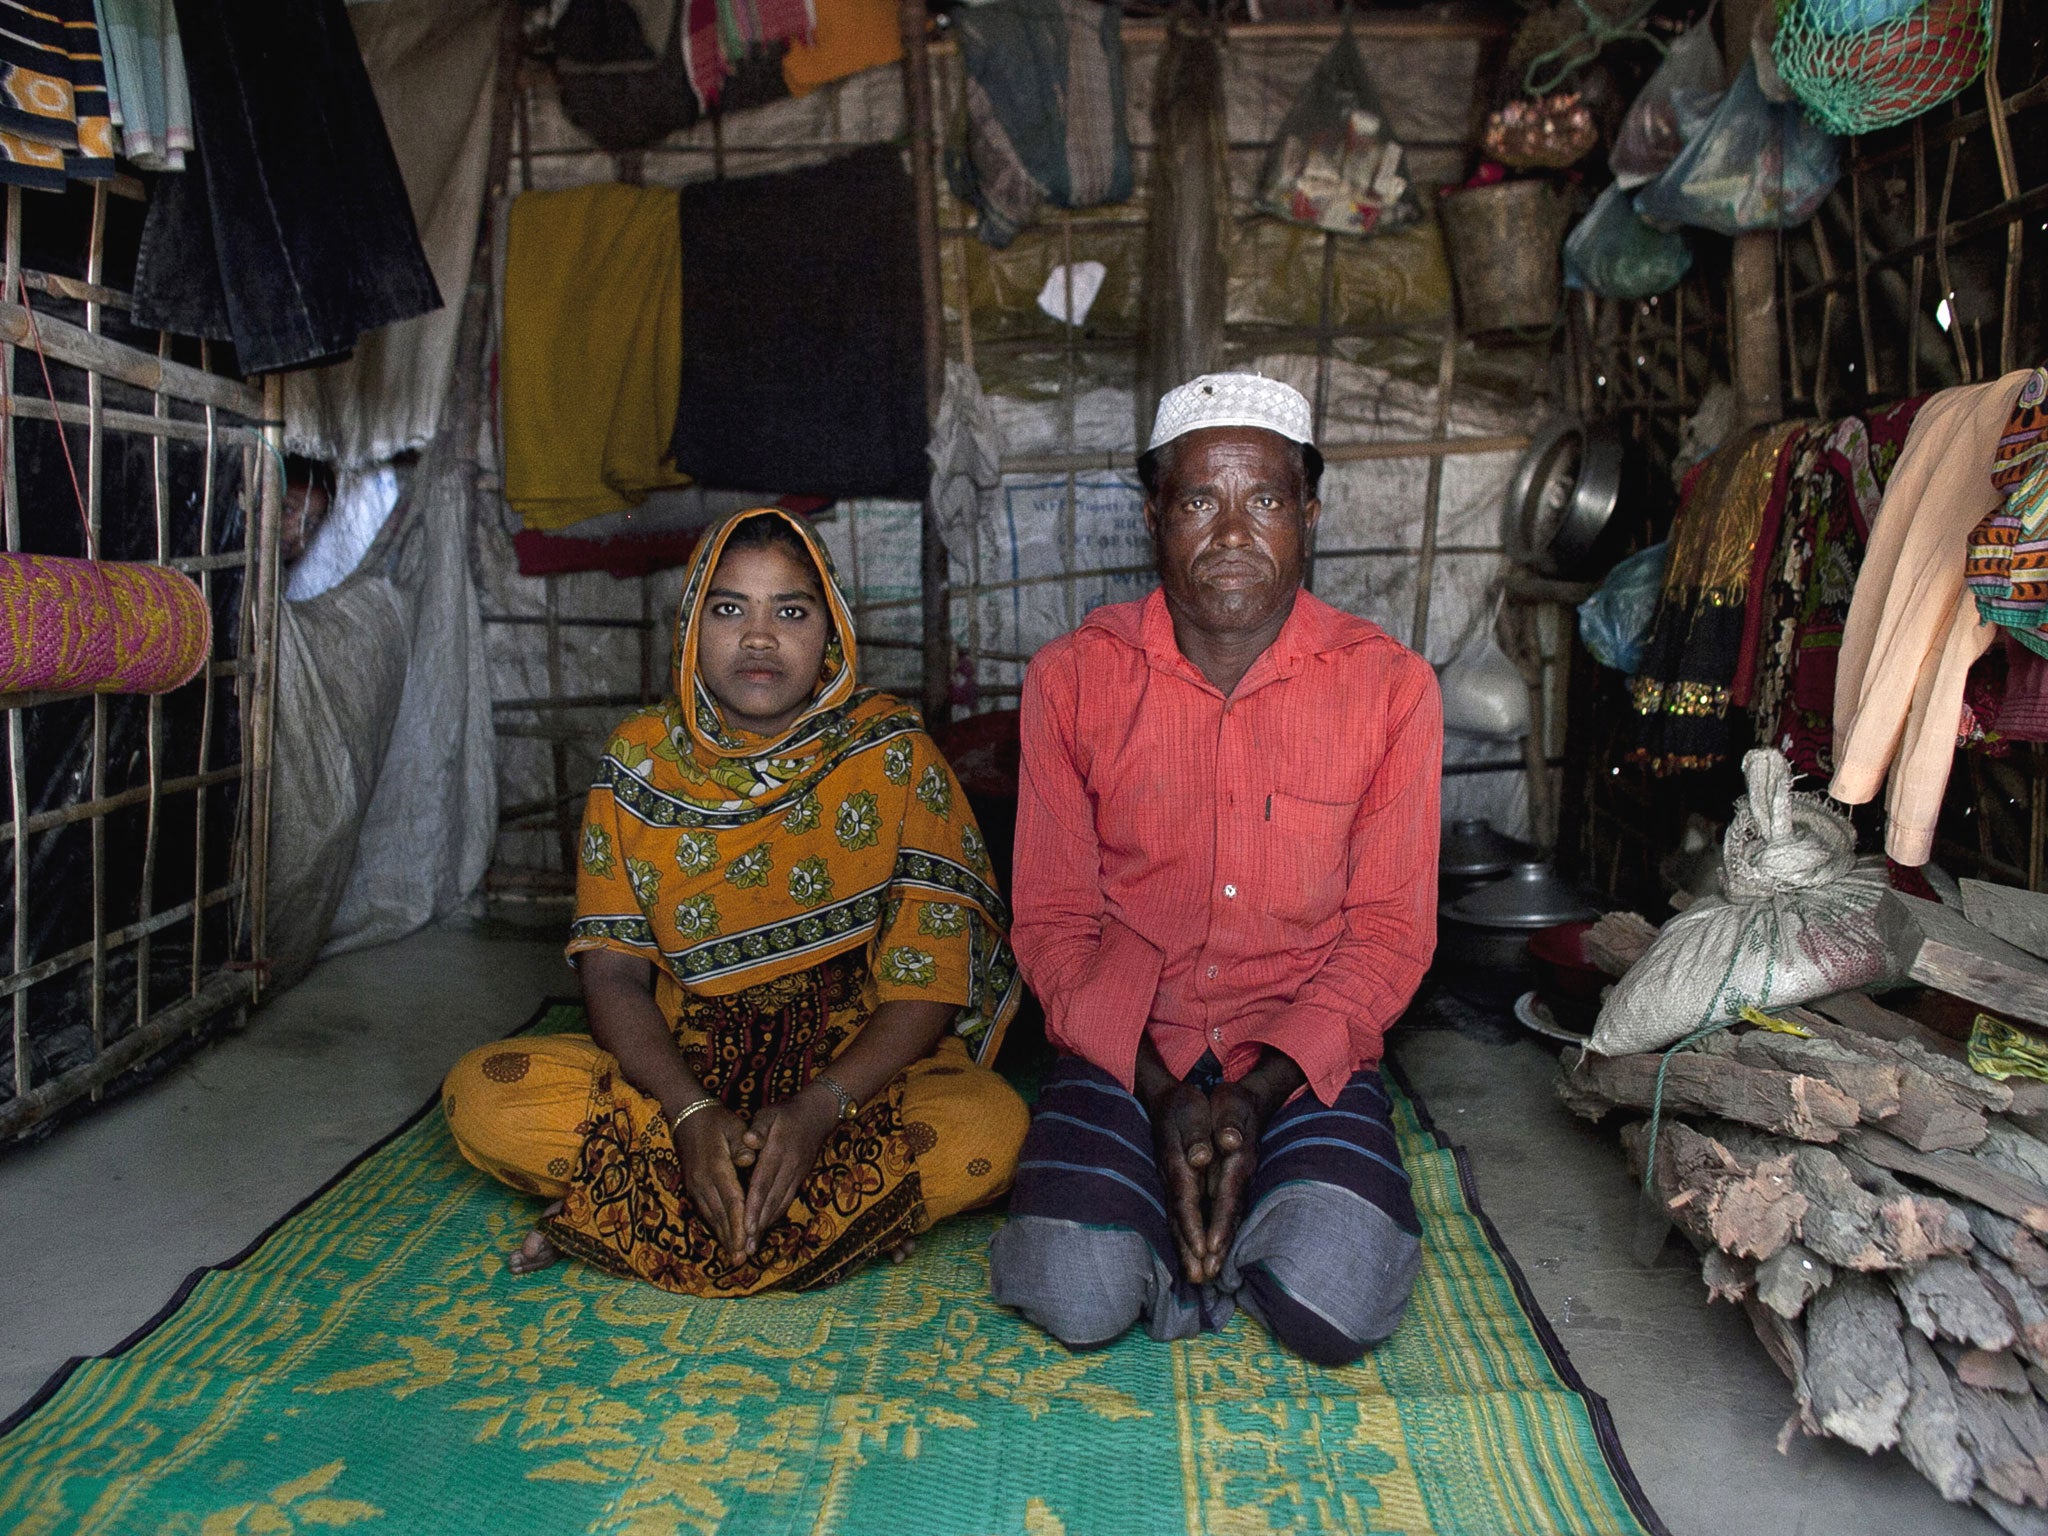 Hamid and his daughter Rajama sit inside their home in the Shamalapur Rohingya refugee settlement in Chittagong district. They fled to Bangladesh from the Dhuachopara village in the Rachidhong district of Myanmar